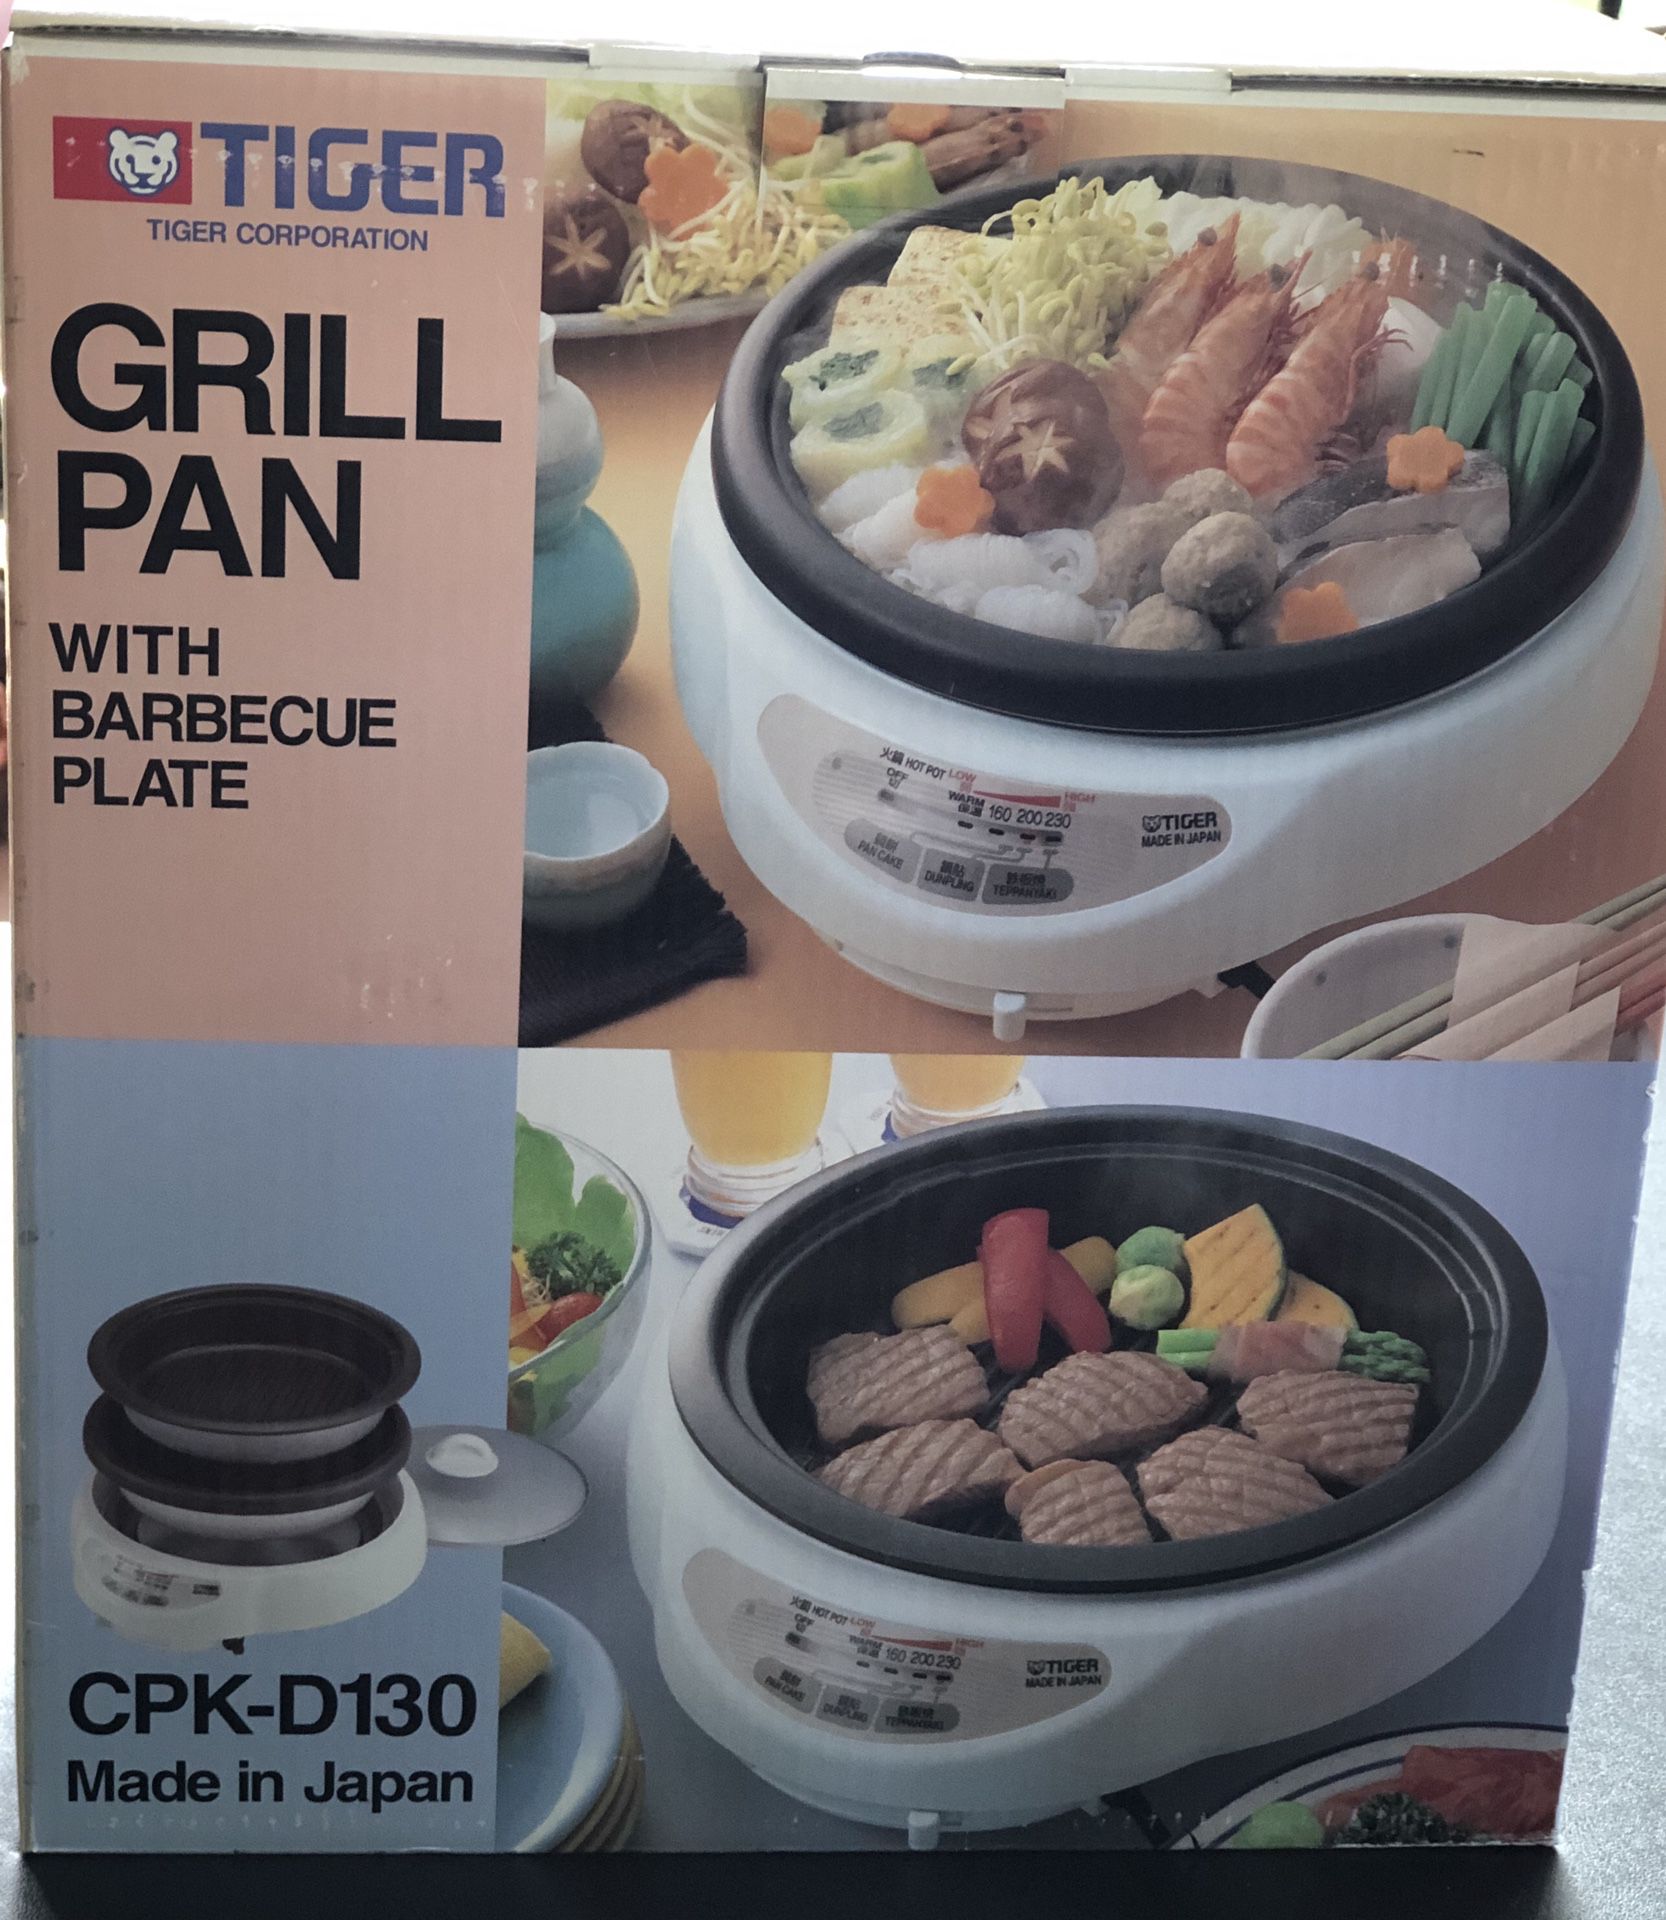 New in Box Tiger CPK-D130 electric grill pan